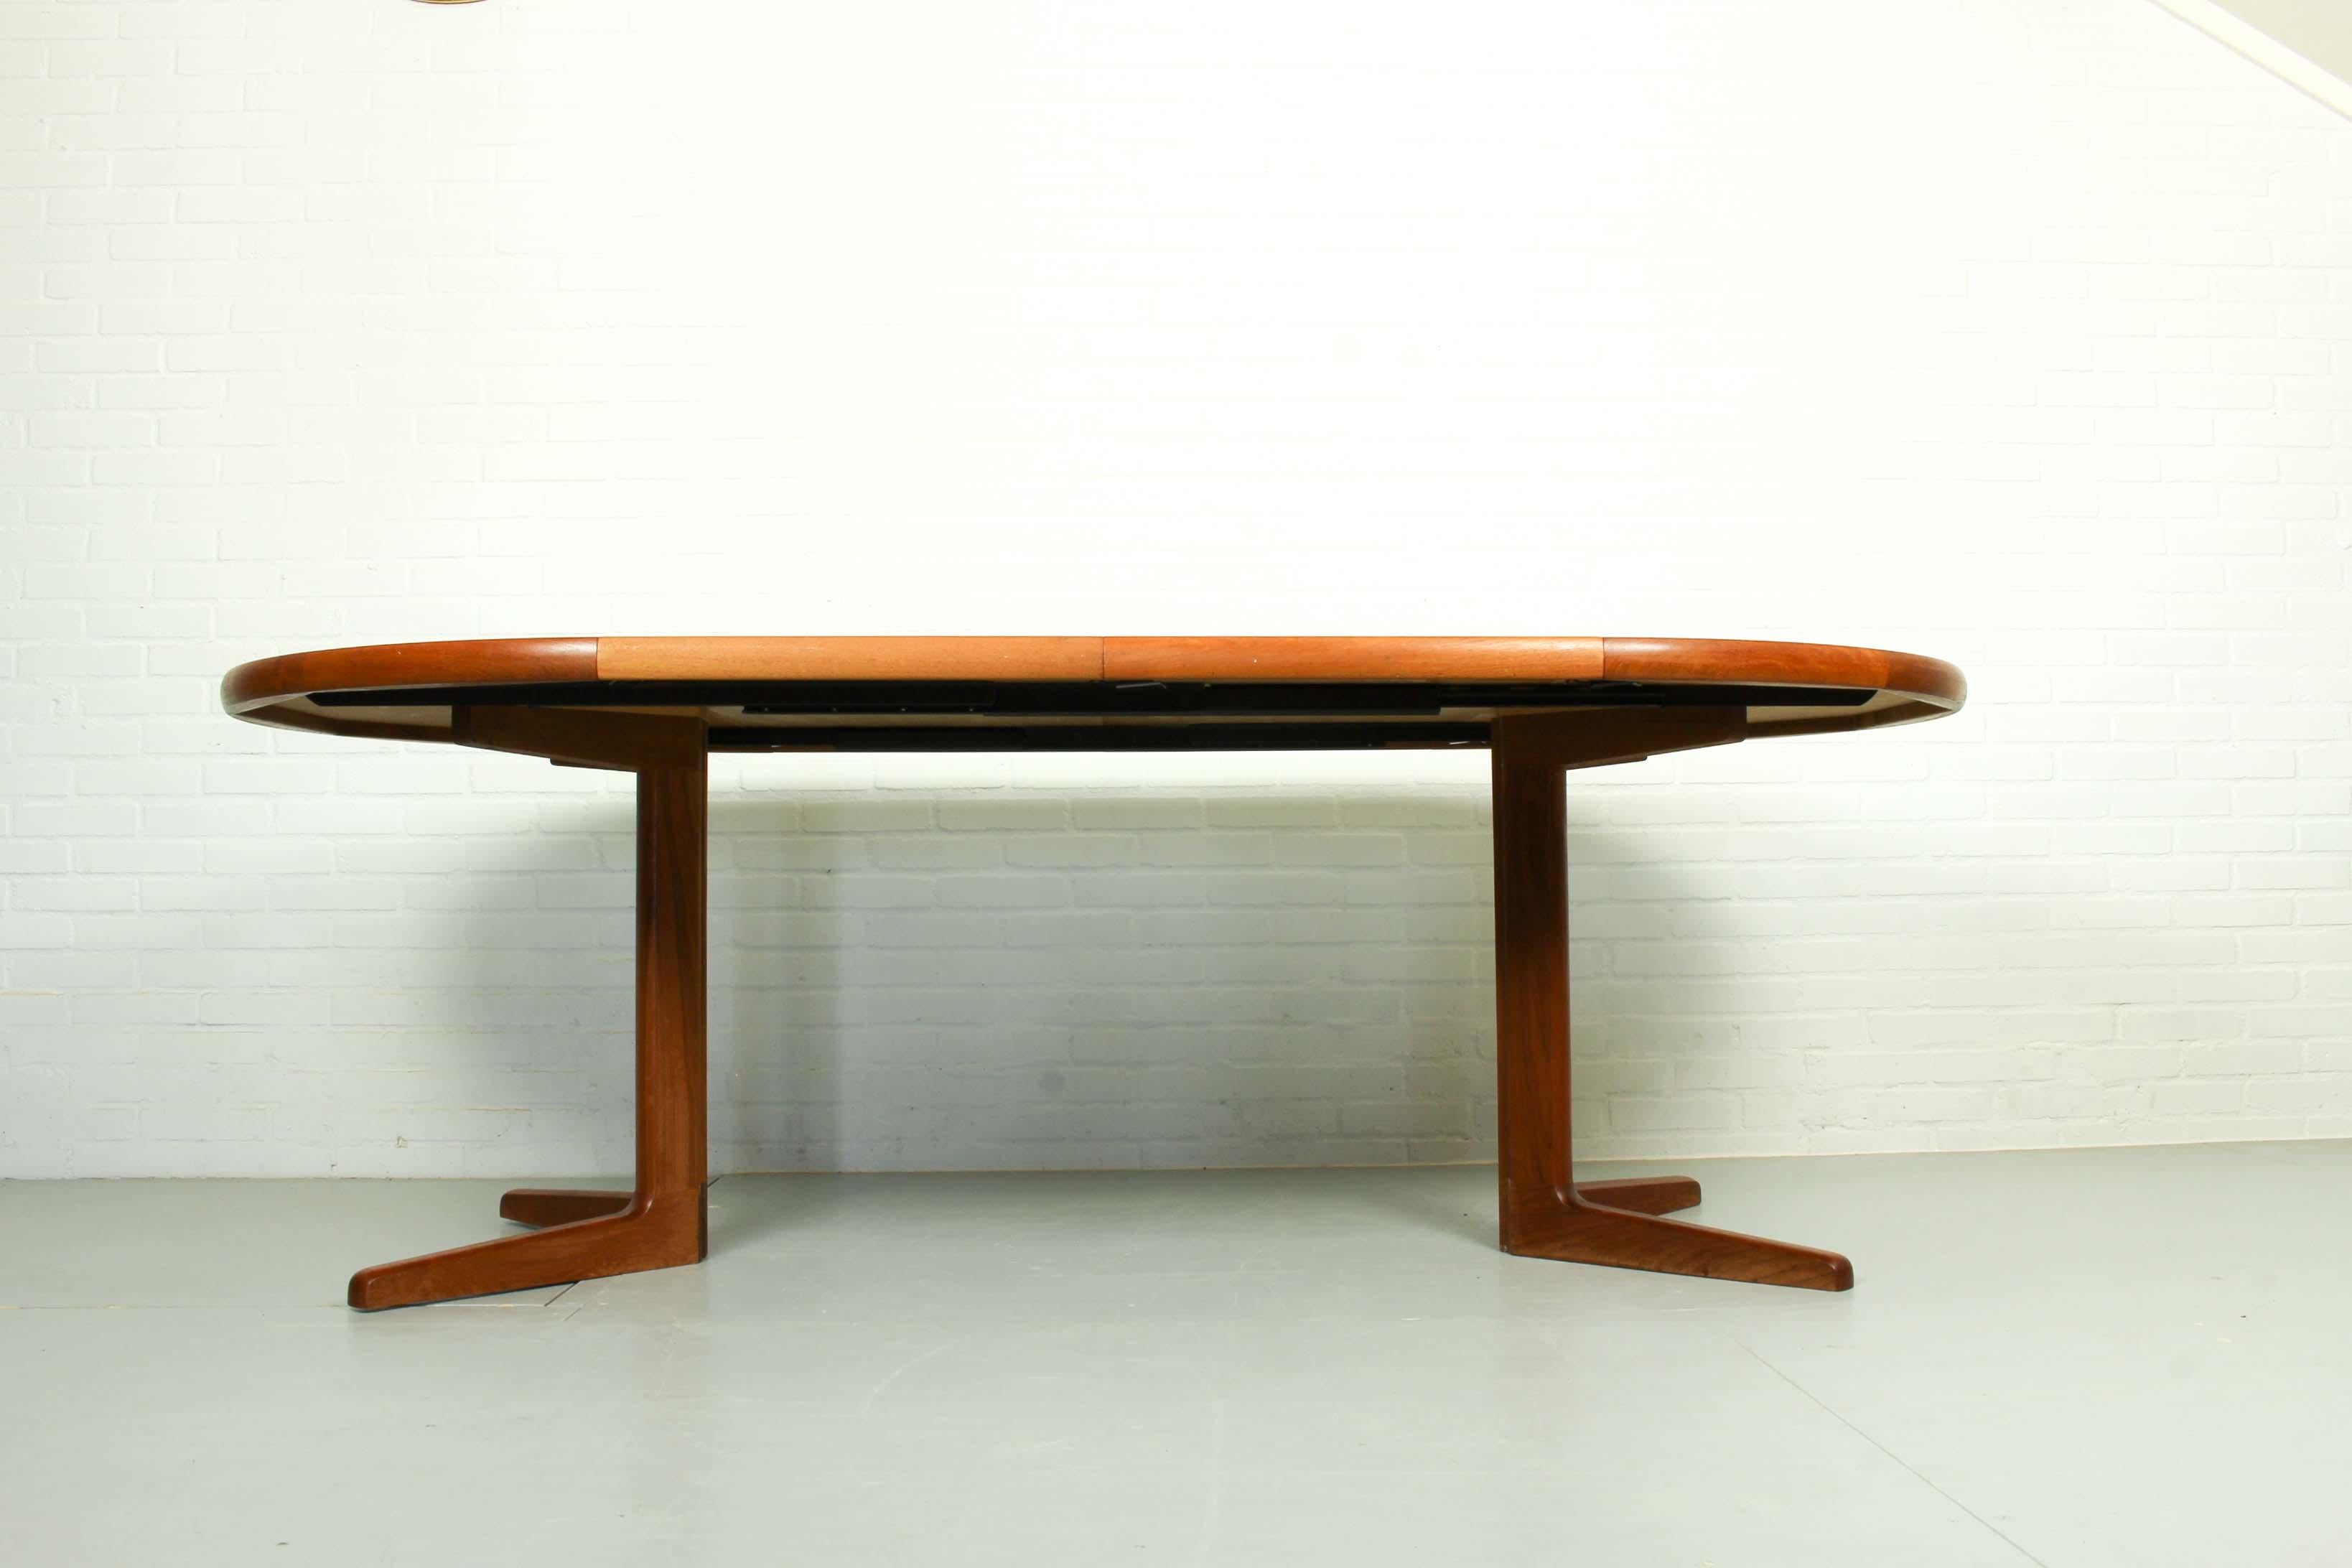 Midcentury teak expandable sculptural round dining table with 2 leaves, in the style of Valentinsen manufactured by Korup Stolefabrik. Made circa 1960 all teak with solid teak legs. Original finish in excellent condition. Stamped under table.